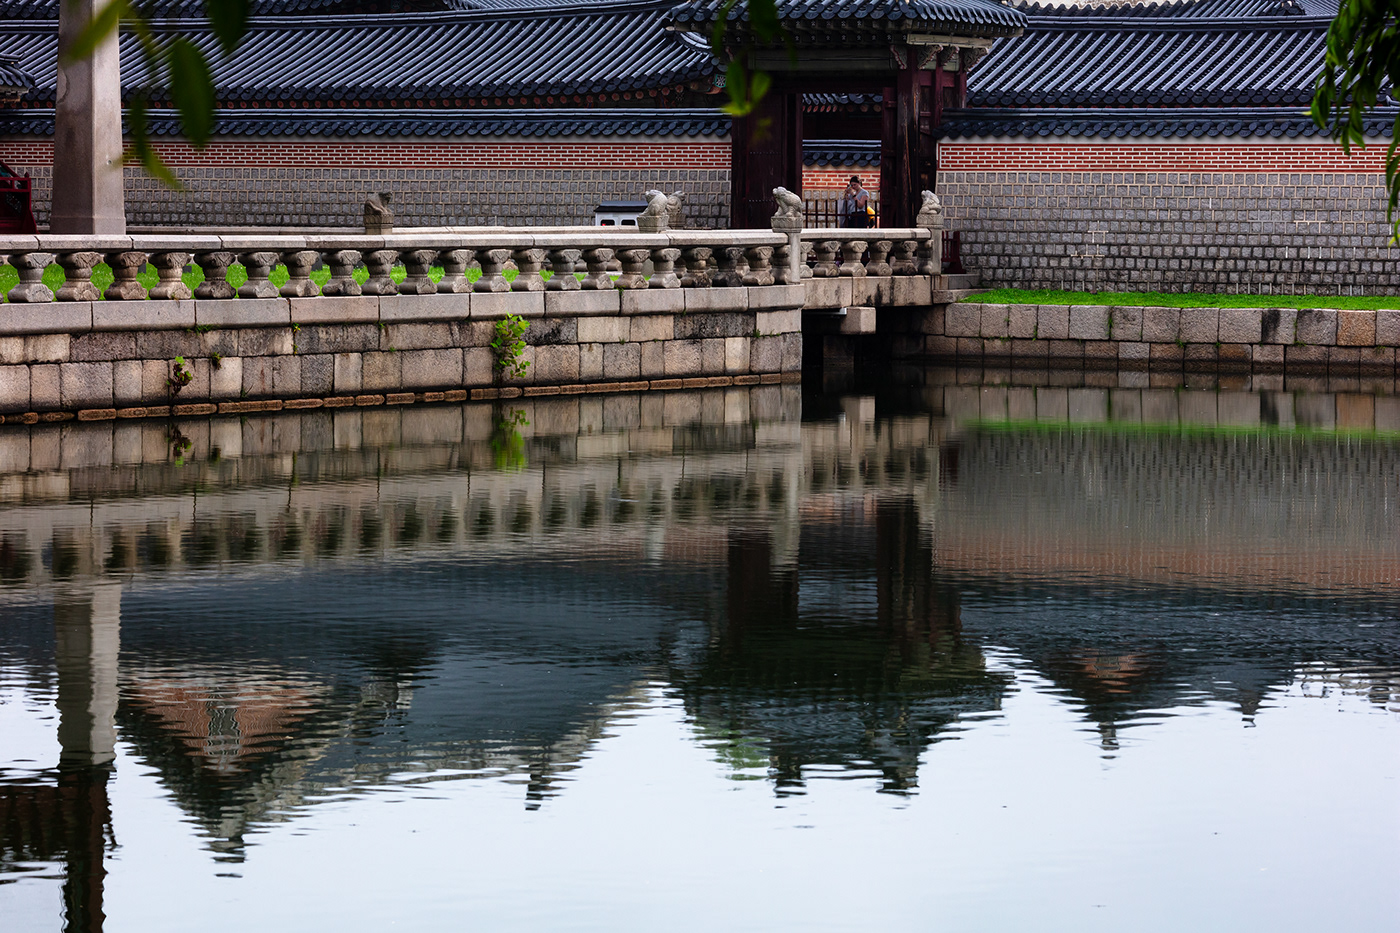 building architecture modern house lake reflections a lotus flower Republice of Korea Seoyl the royal palace